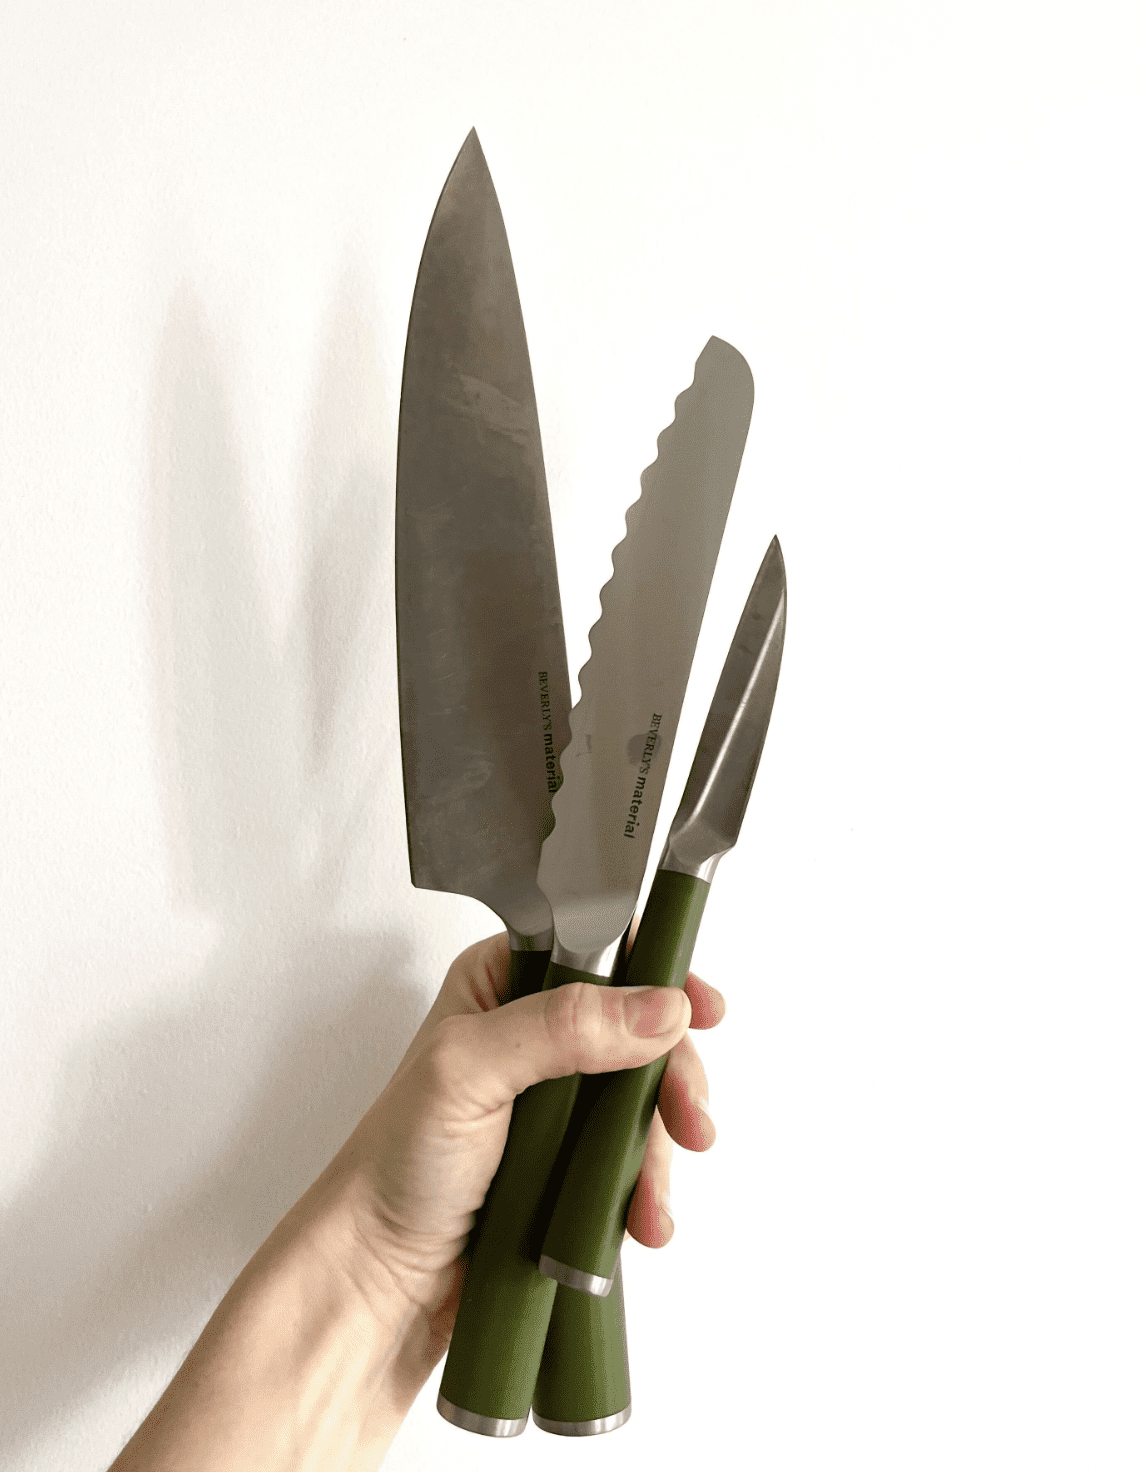 https://cdn.apartmenttherapy.info/image/upload/v1666021902/commerce/trio-of-knives-LL-image.png